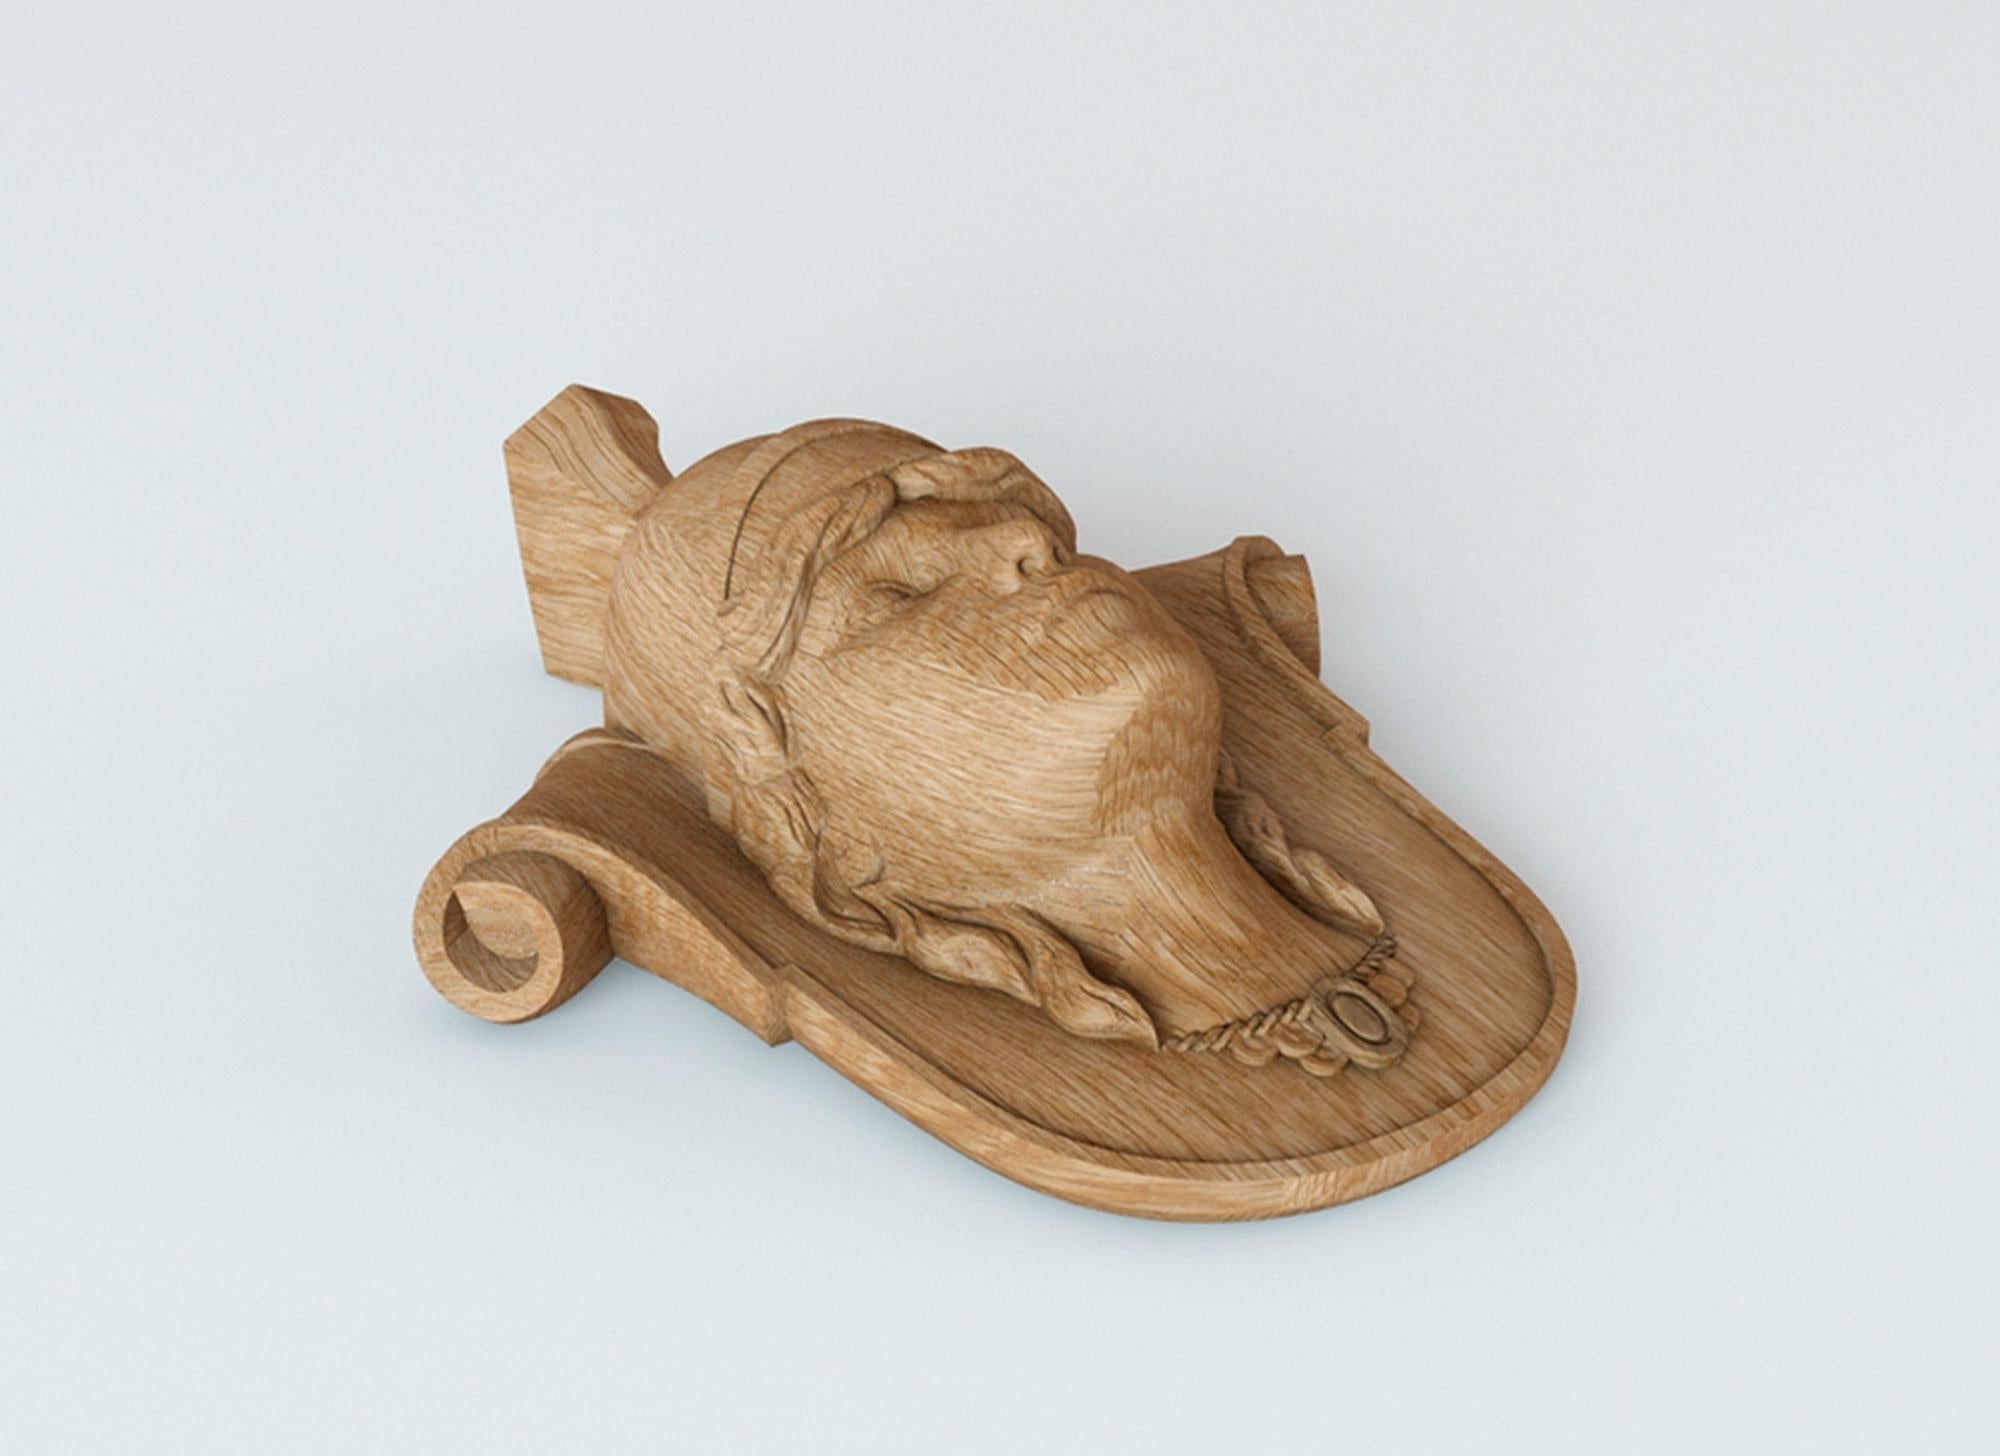 High quality carved mask from oak or beech of your choice.

>> SKU: M-003

>> Dimensions (A  x B x C):

1) 6.02